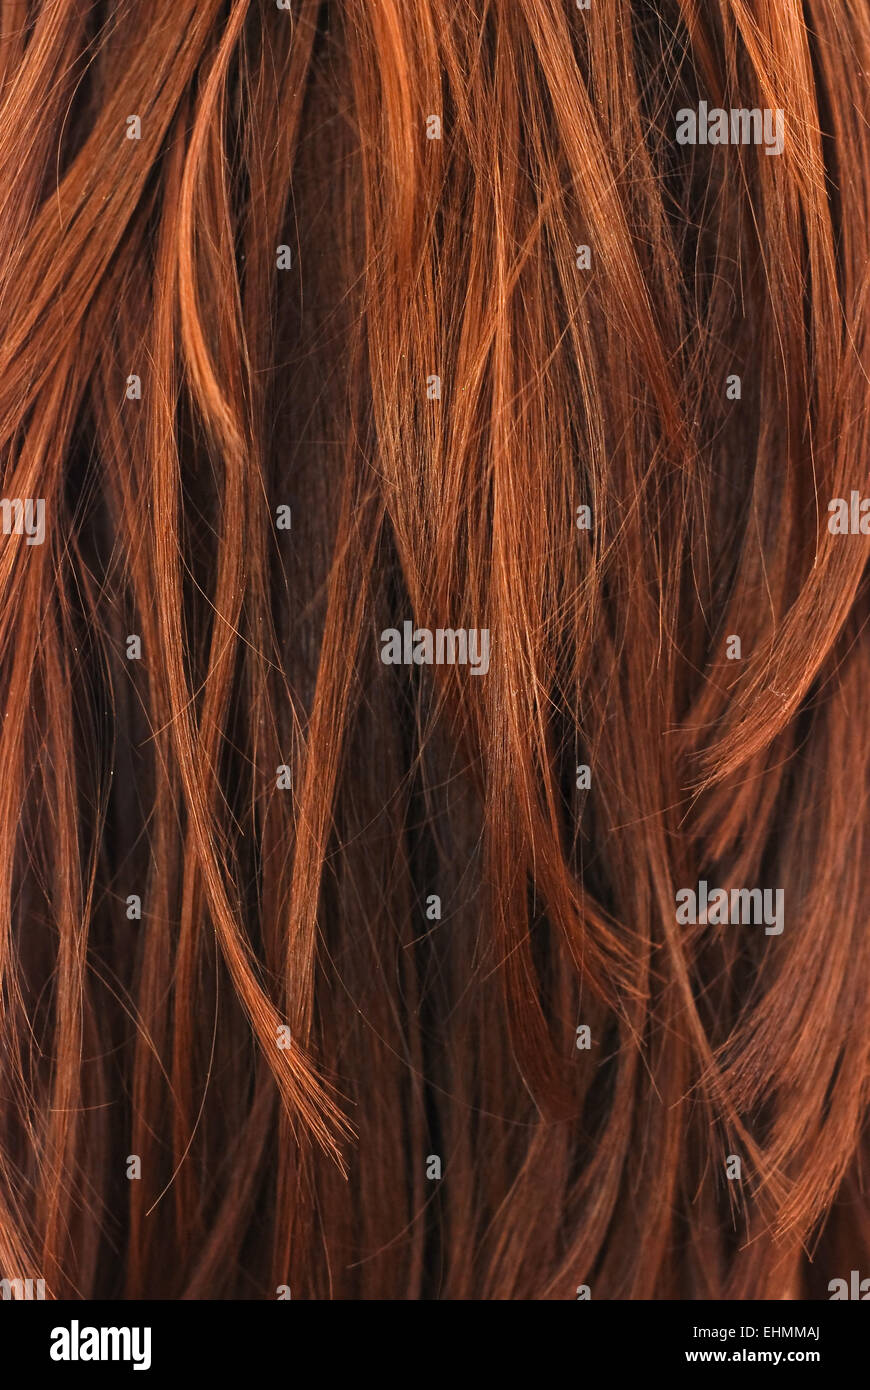 long brown hair background texture Stock Photo